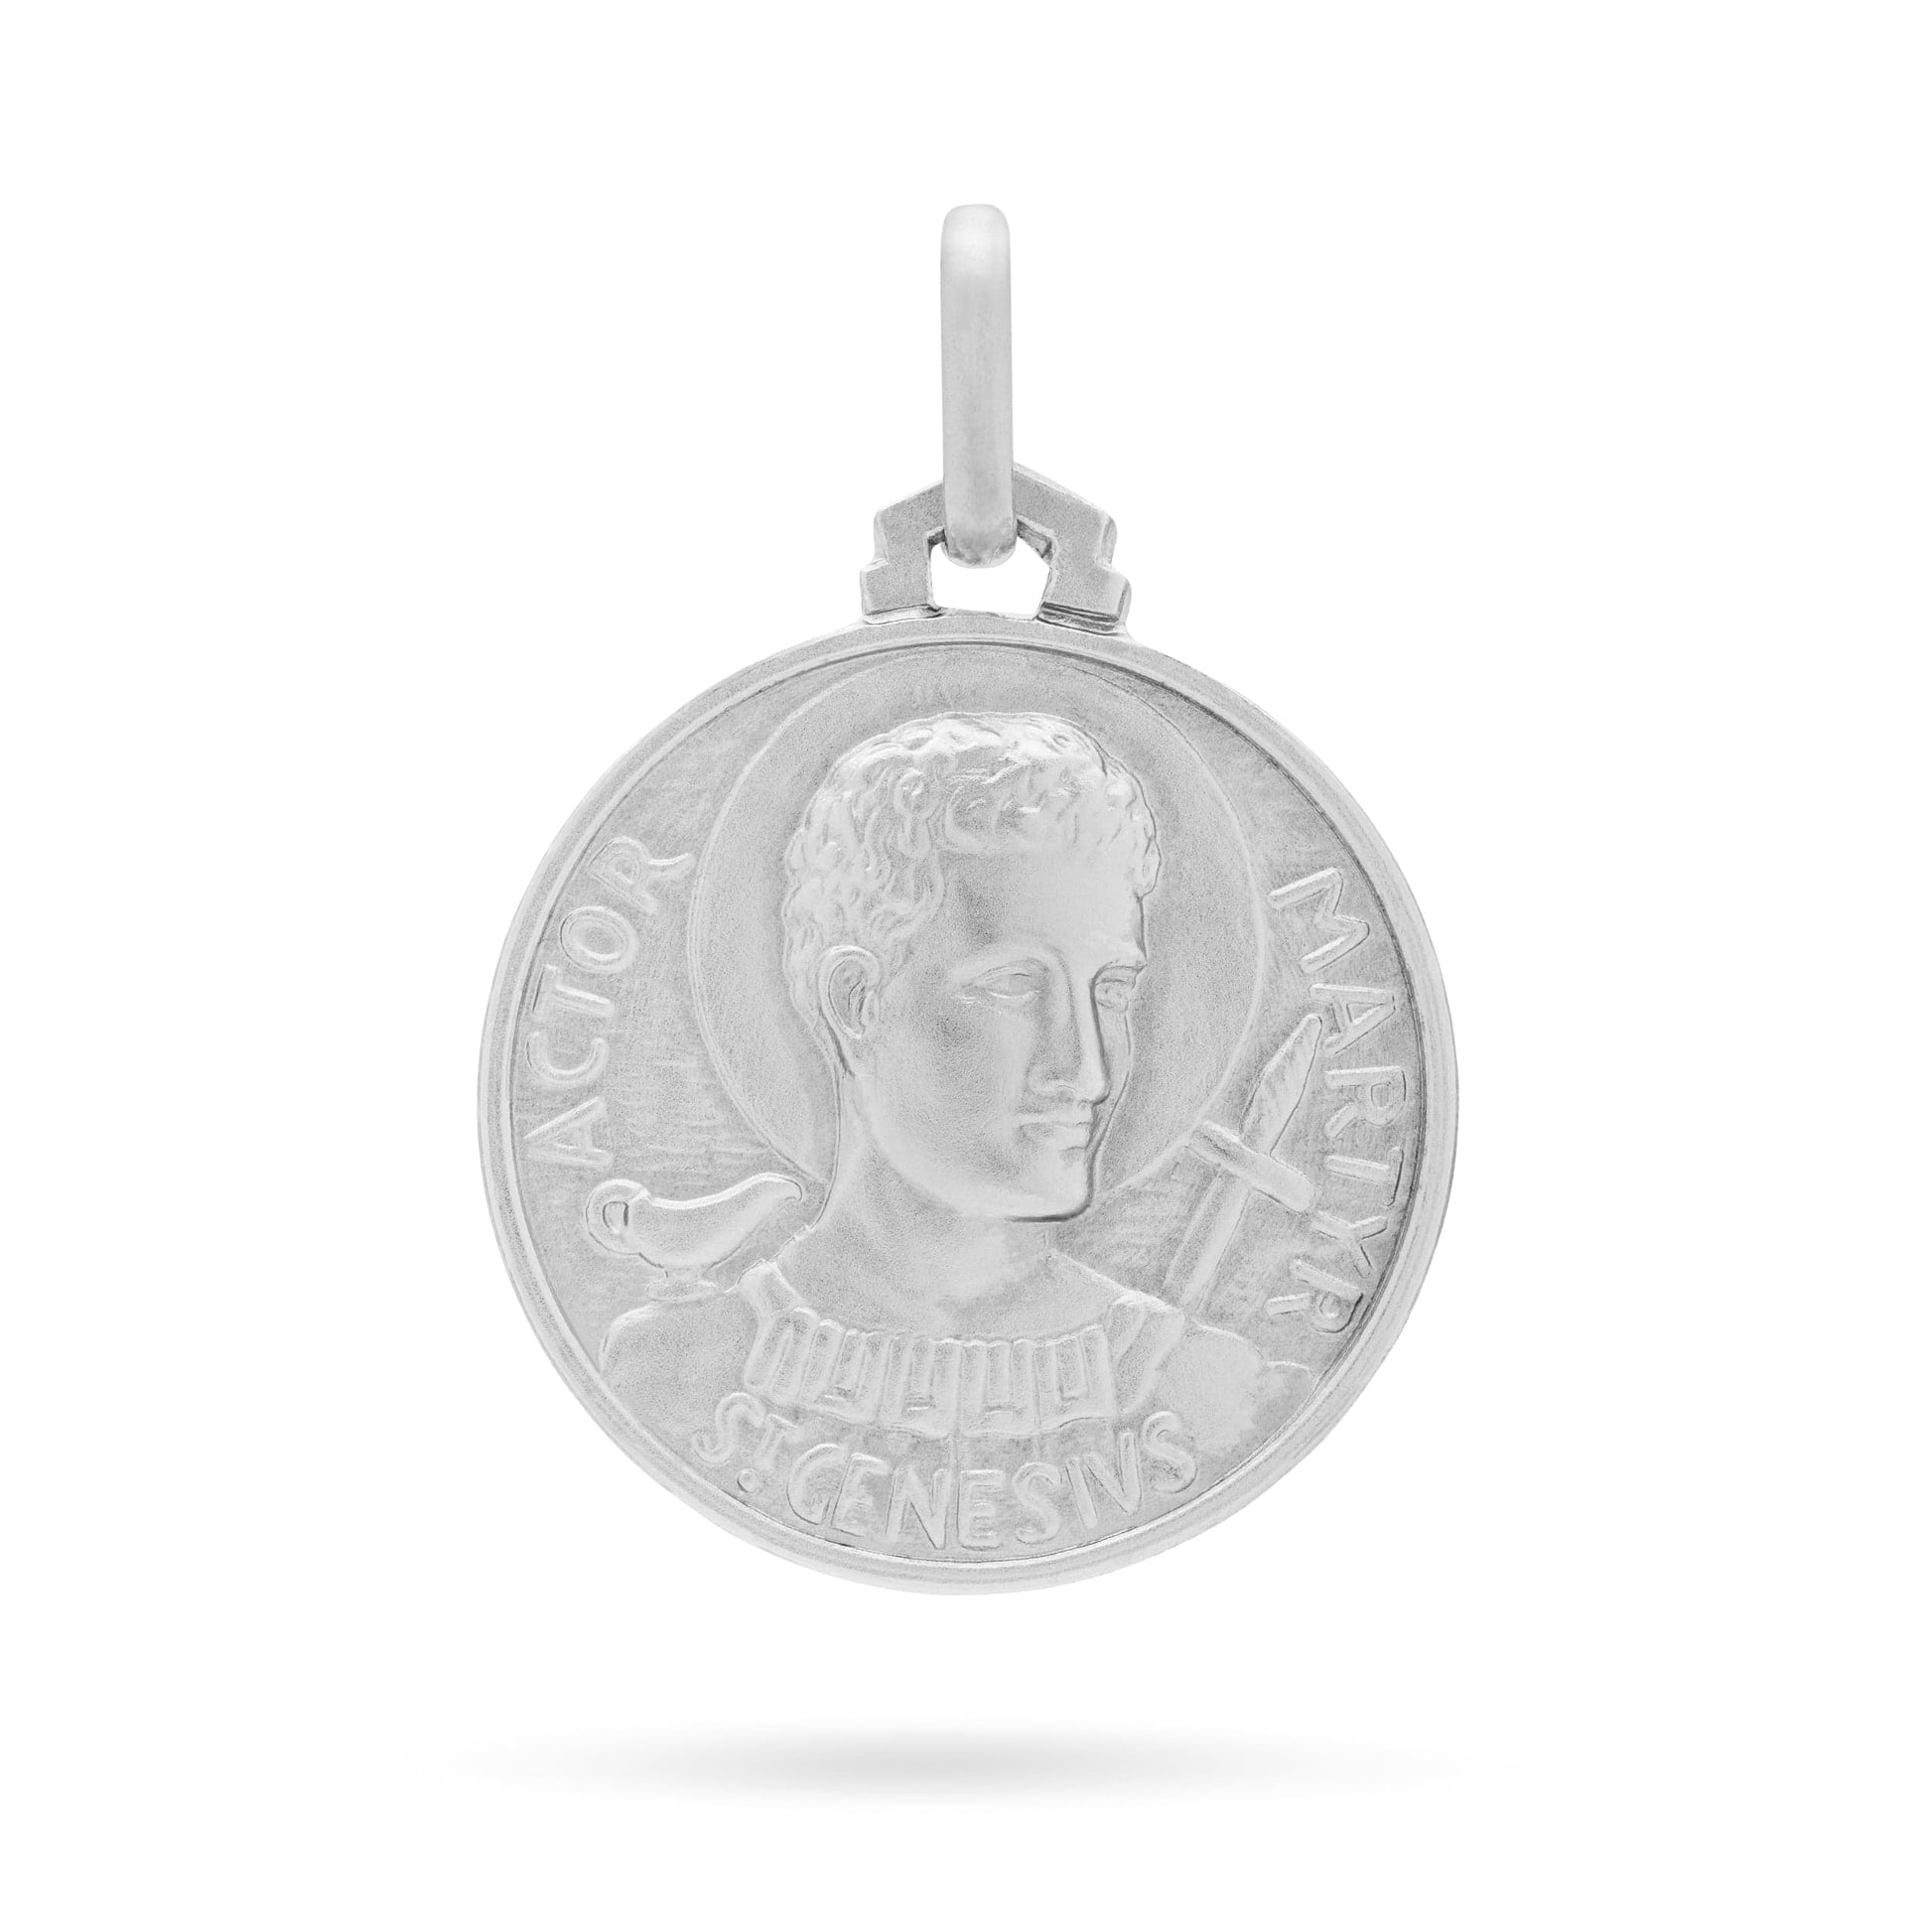 MONDO CATTOLICO Medal 16 mm (0.62 in) Sterling Silver Medal of Saint Genesio